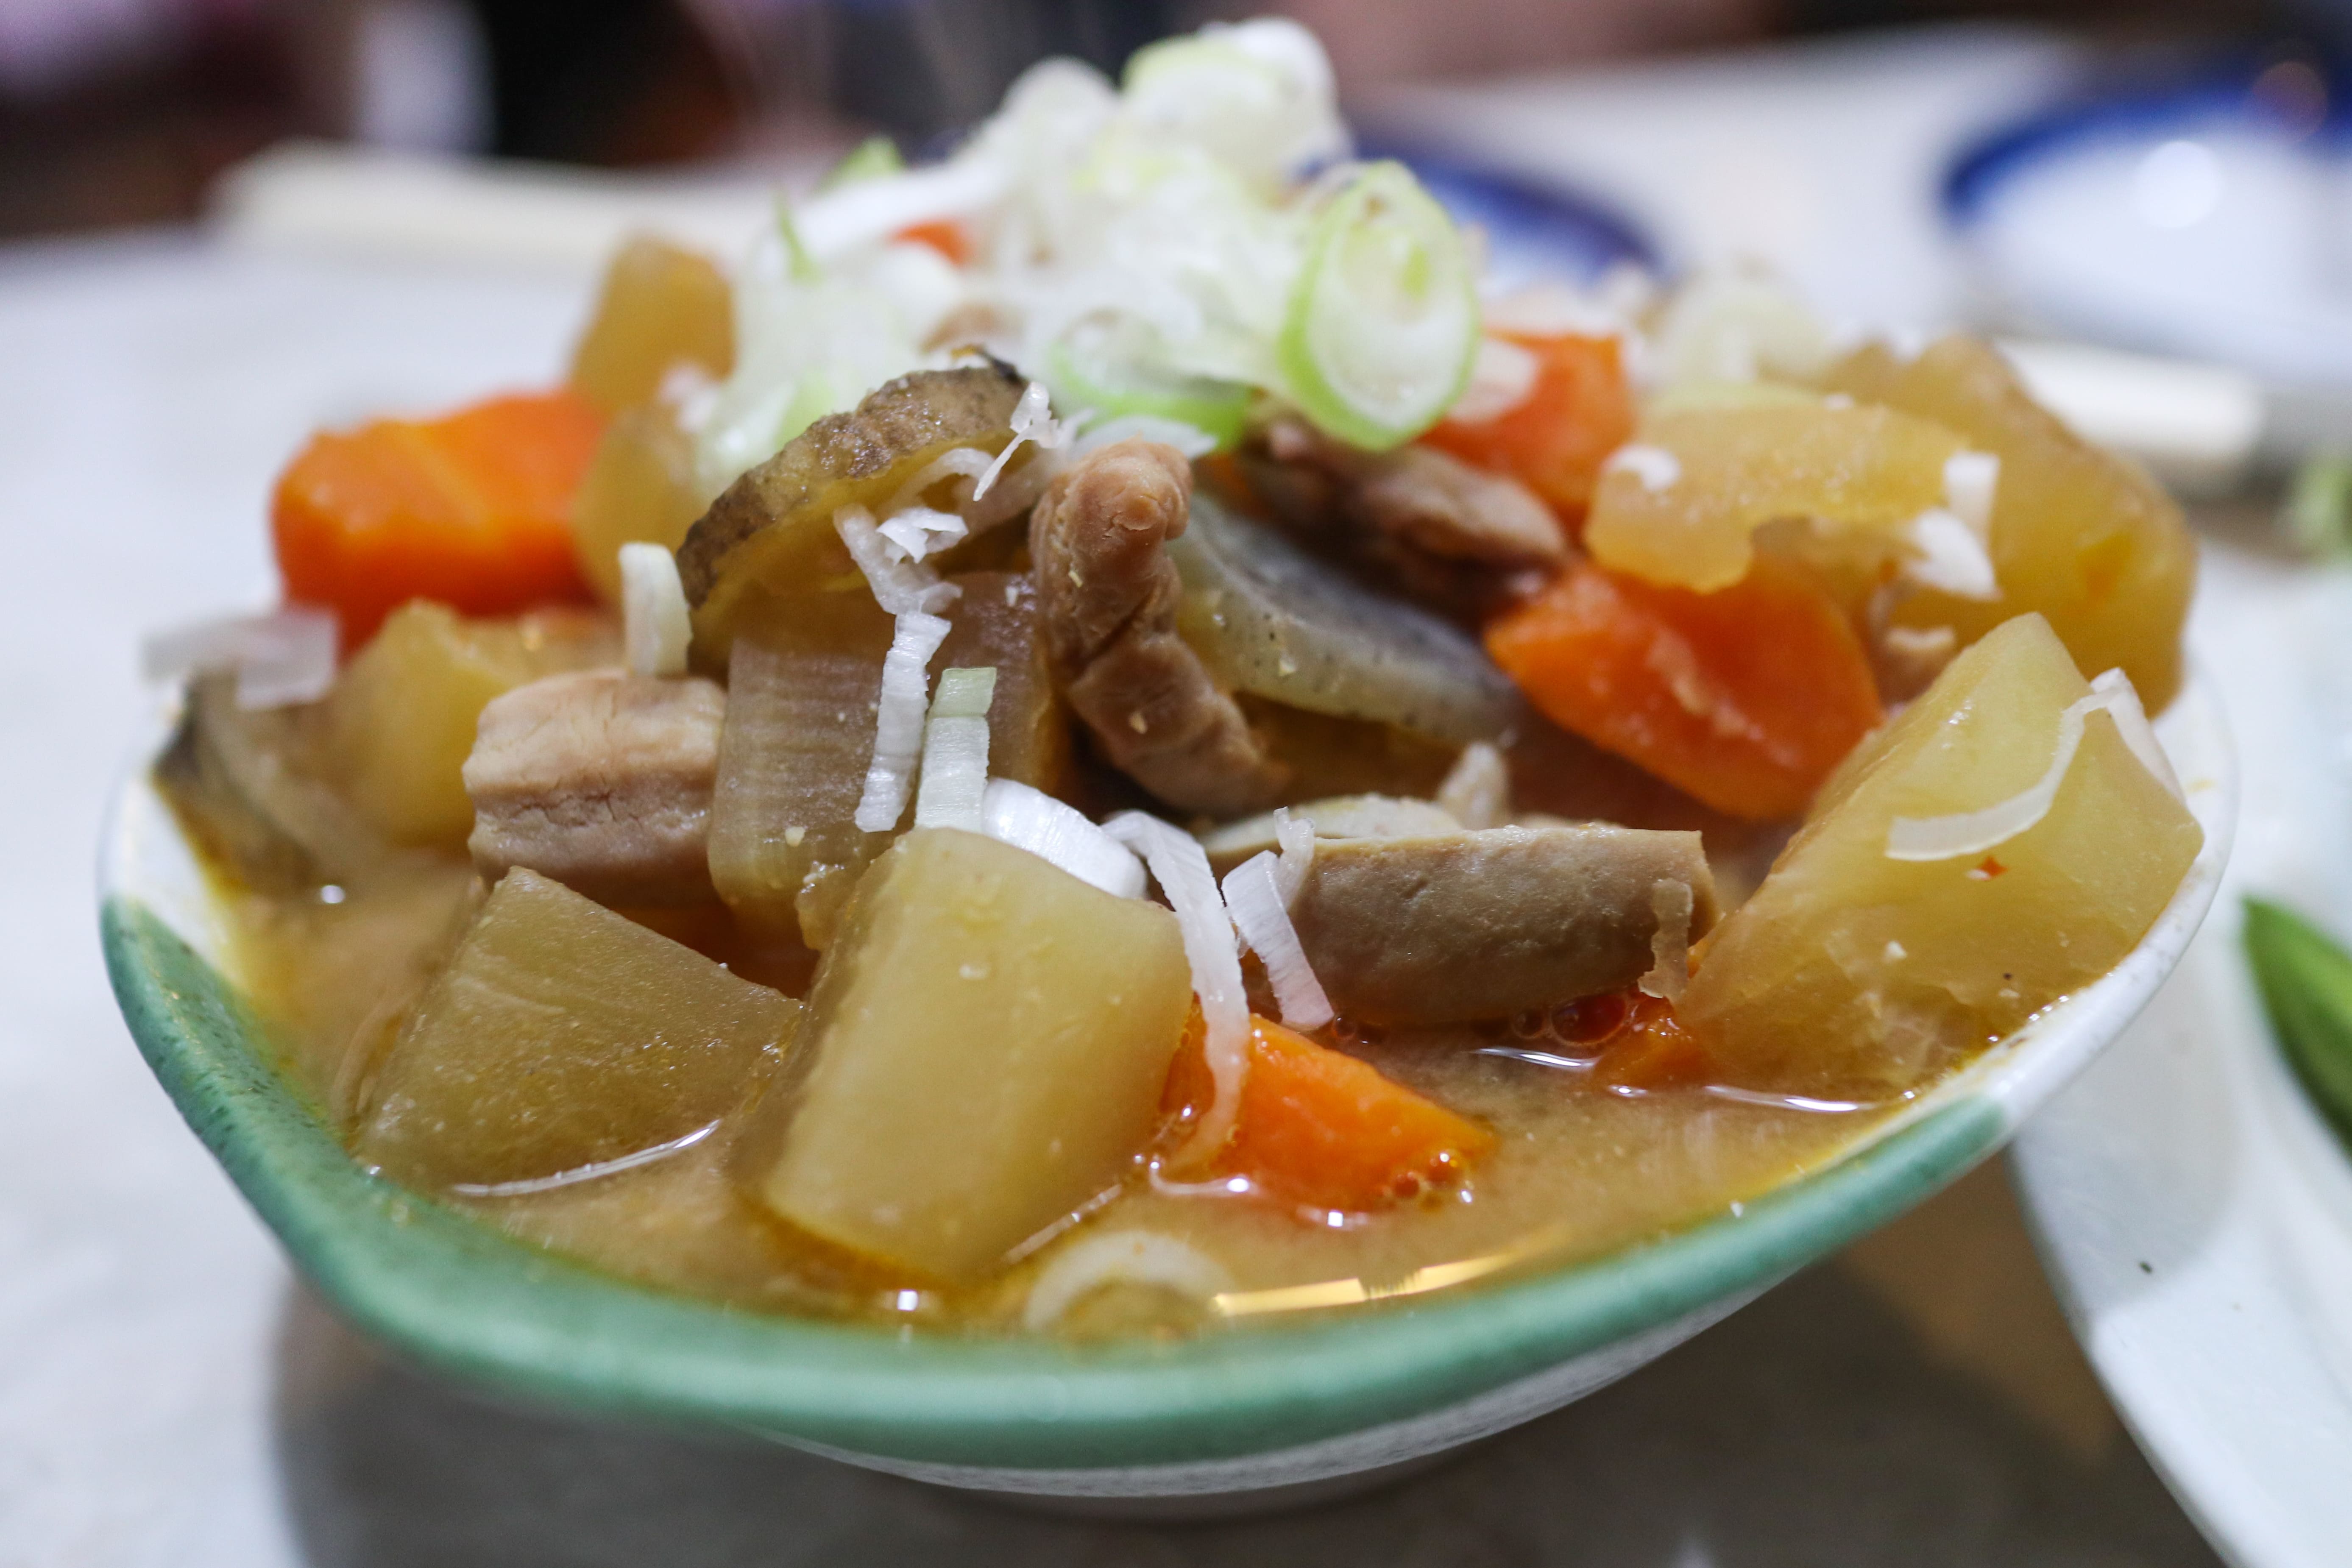 Stew/ One of the most popular food in Izakayas